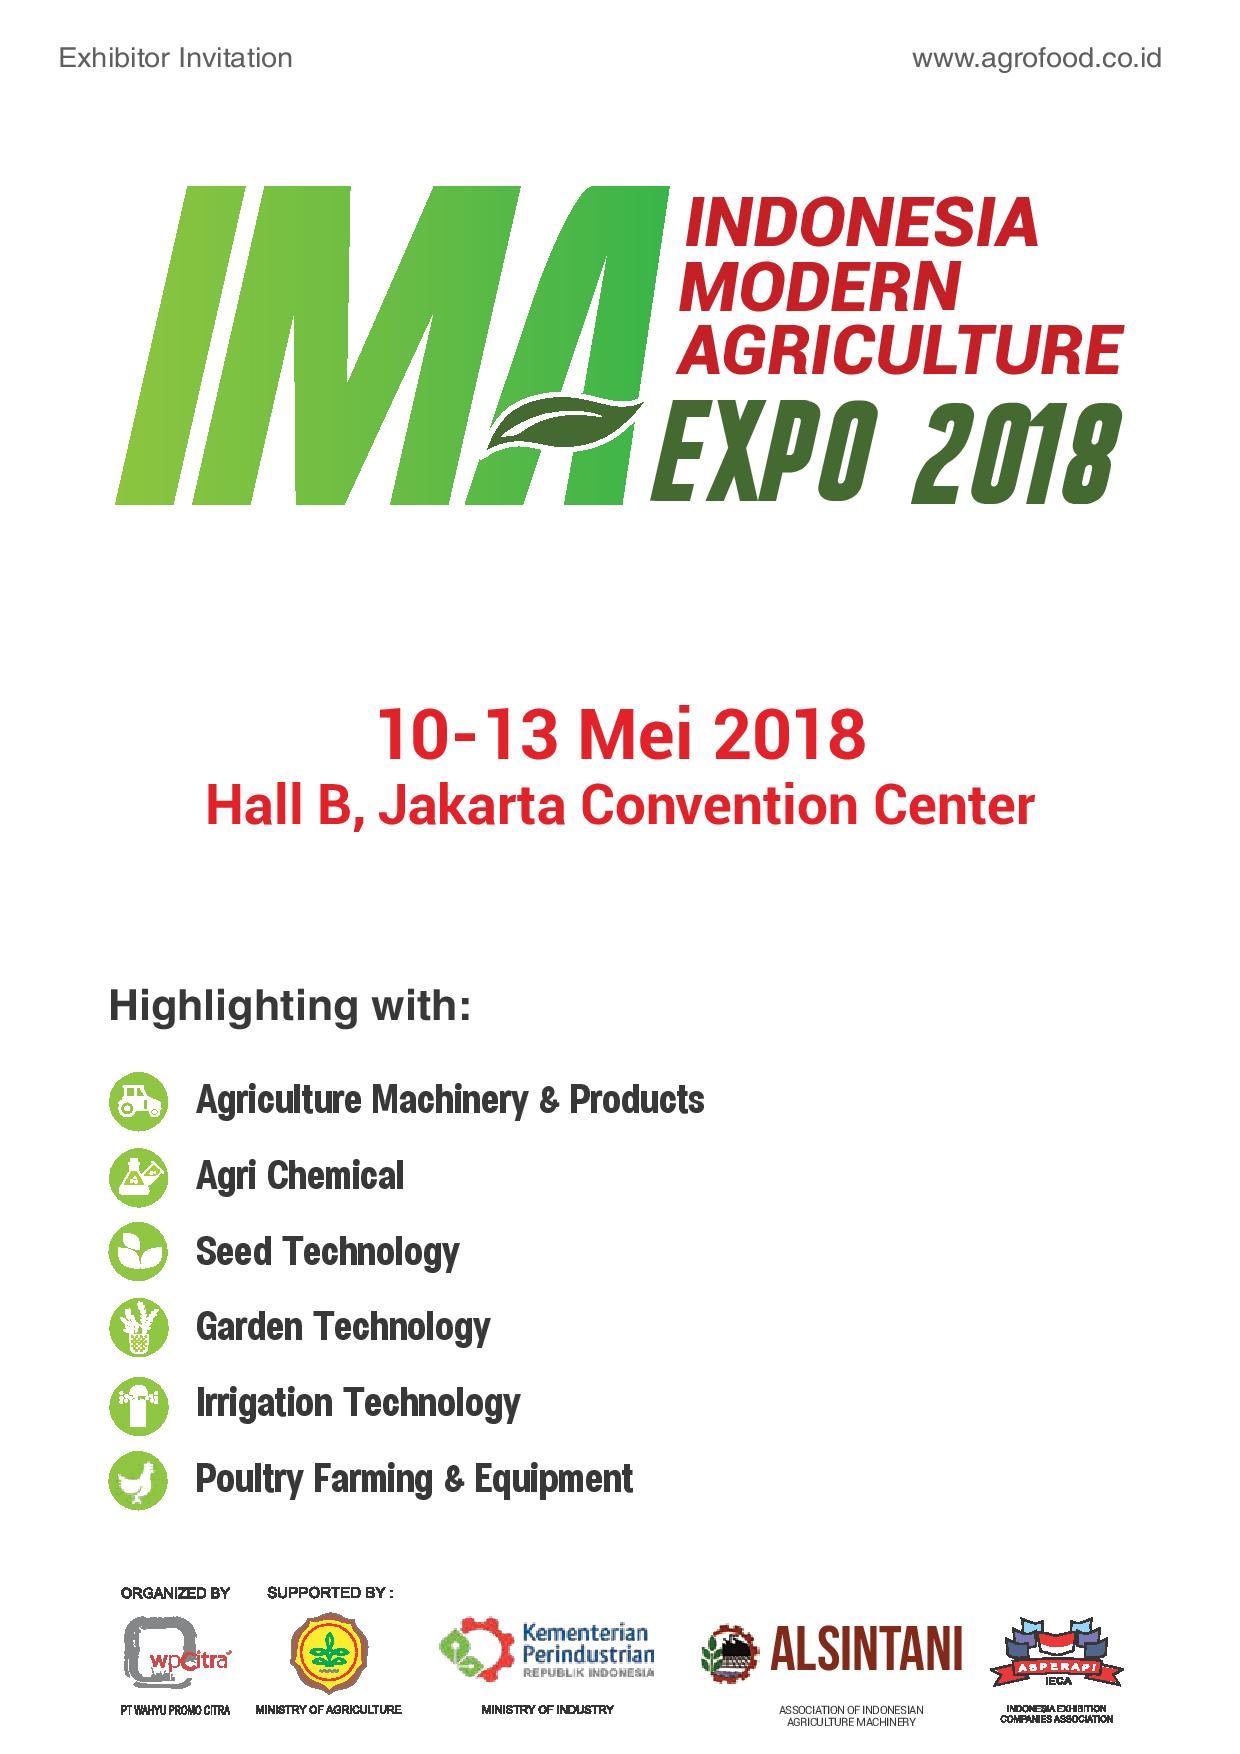 INDONESIA INTERNATIONAL MODERN AGRICULTURE EXPO 2018